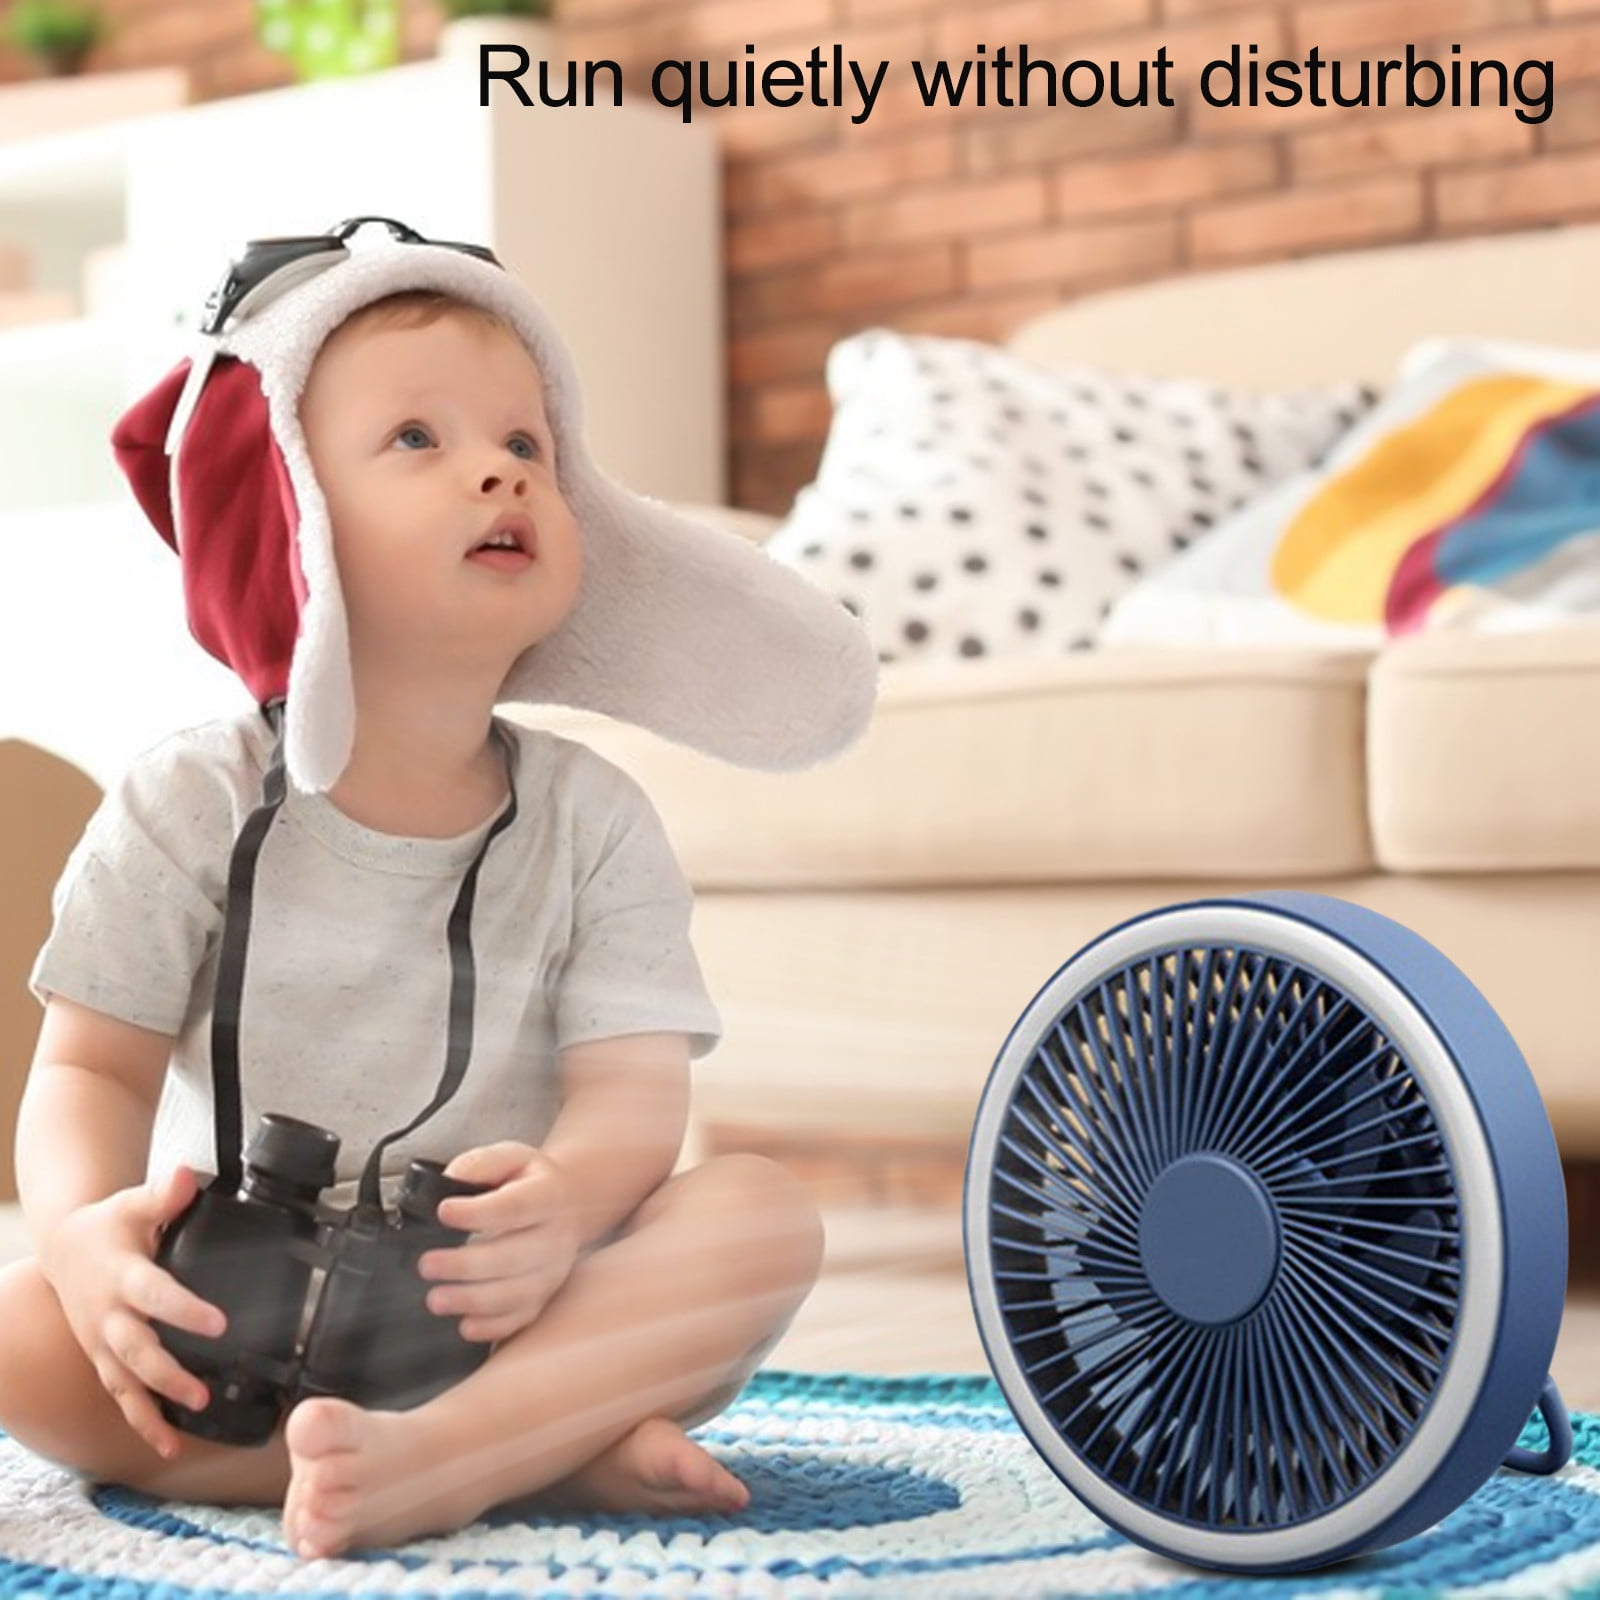 Personal Fan For Home Car Truck Office 3 Blades Quiet Ceiling Fan Kitchen Wall Fan 2000mAh USB Rechargeable Battery Operated 3 Speed 